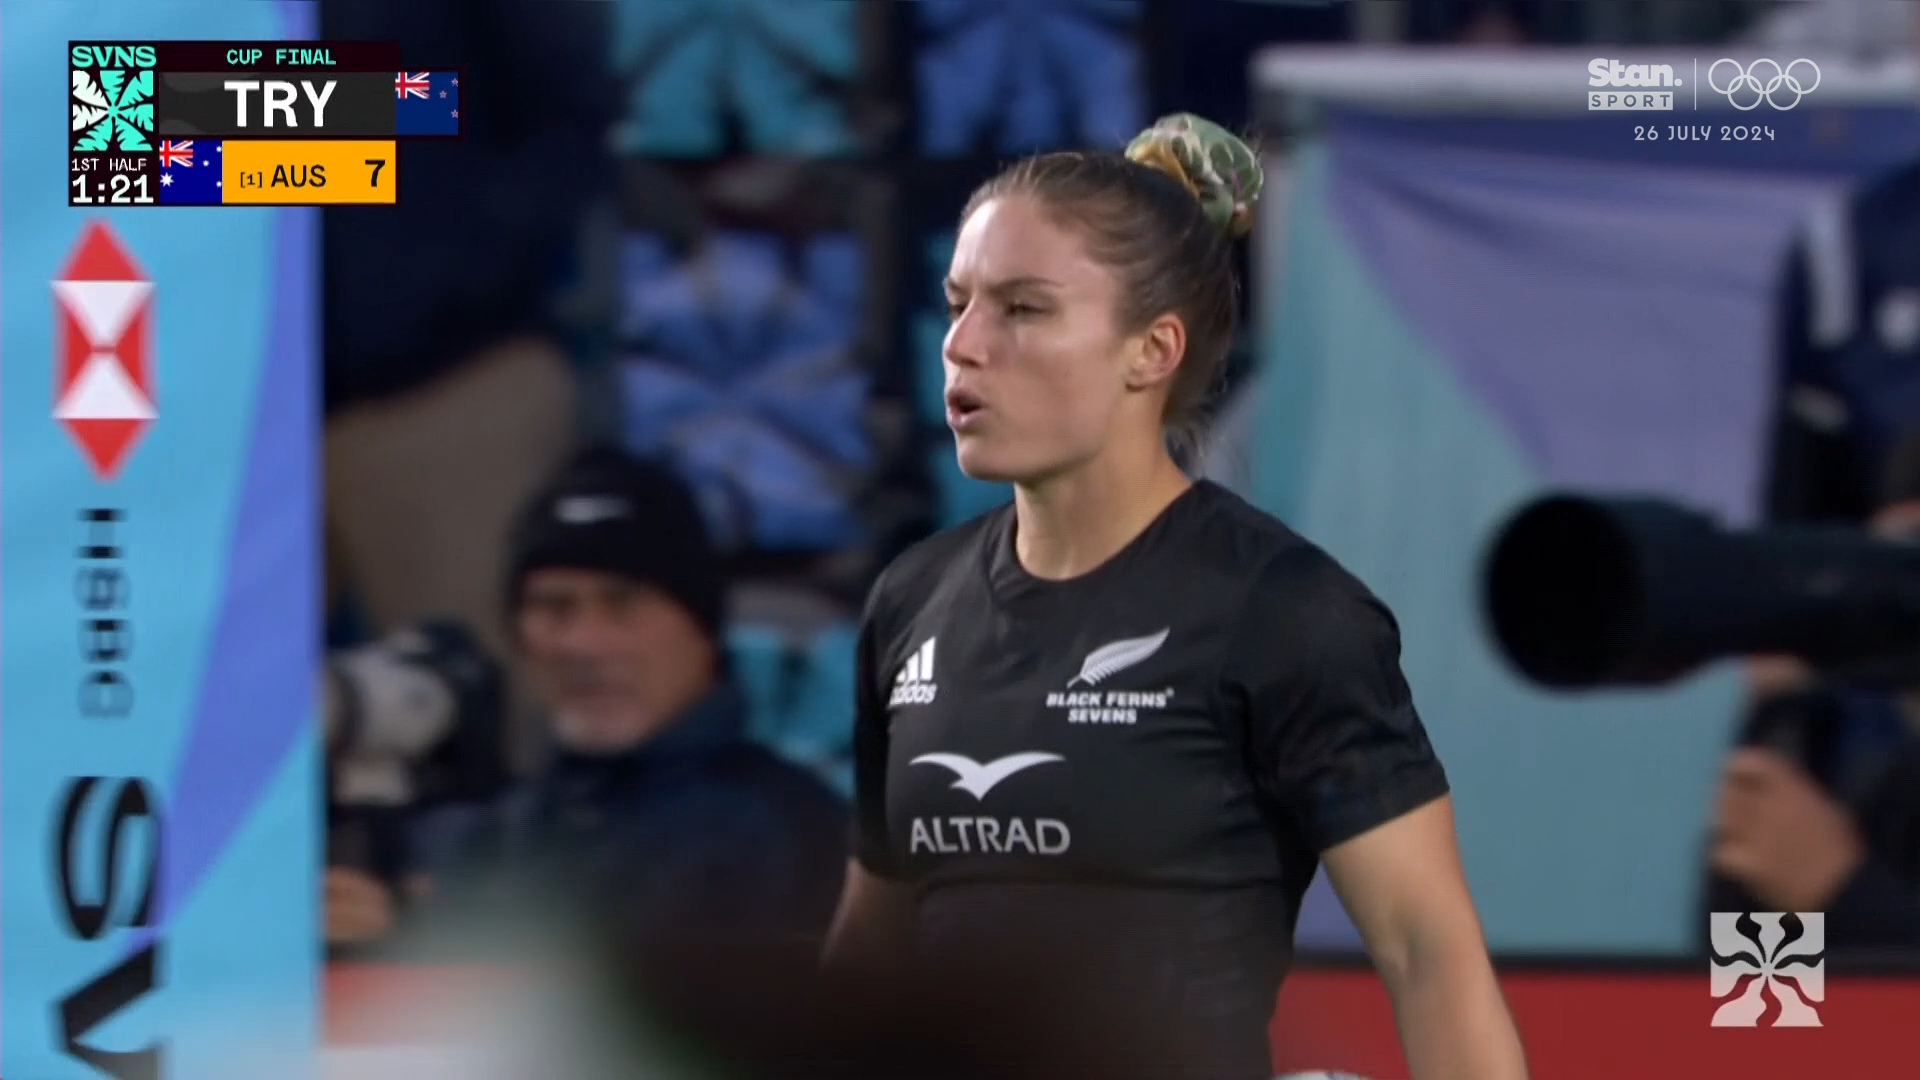 Michaela Blyde scores awesome SVNS try